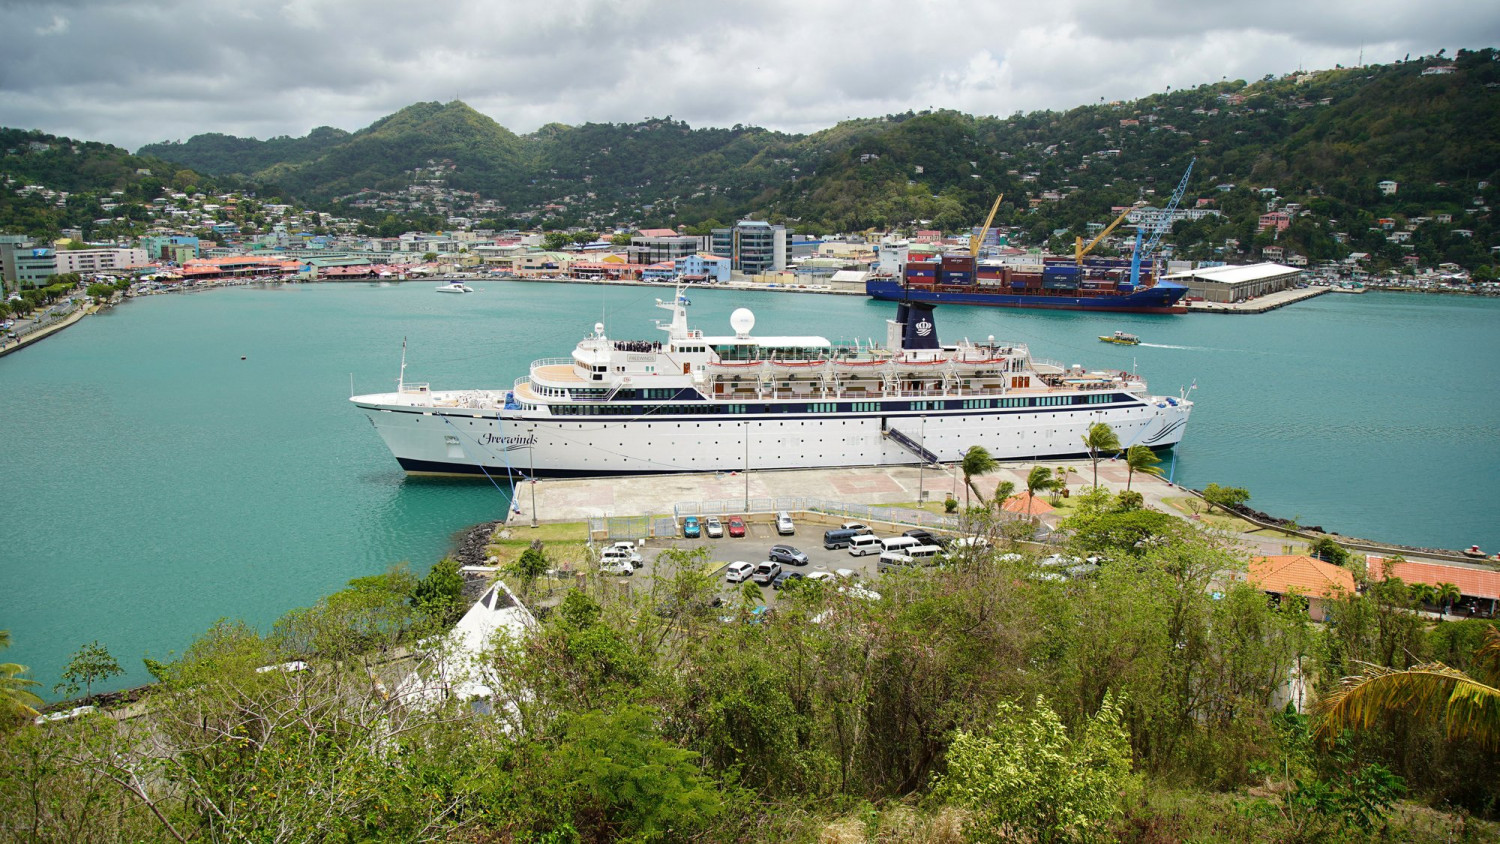 Scientology Cruise Ship to Remain Under Quarantine in Curacao